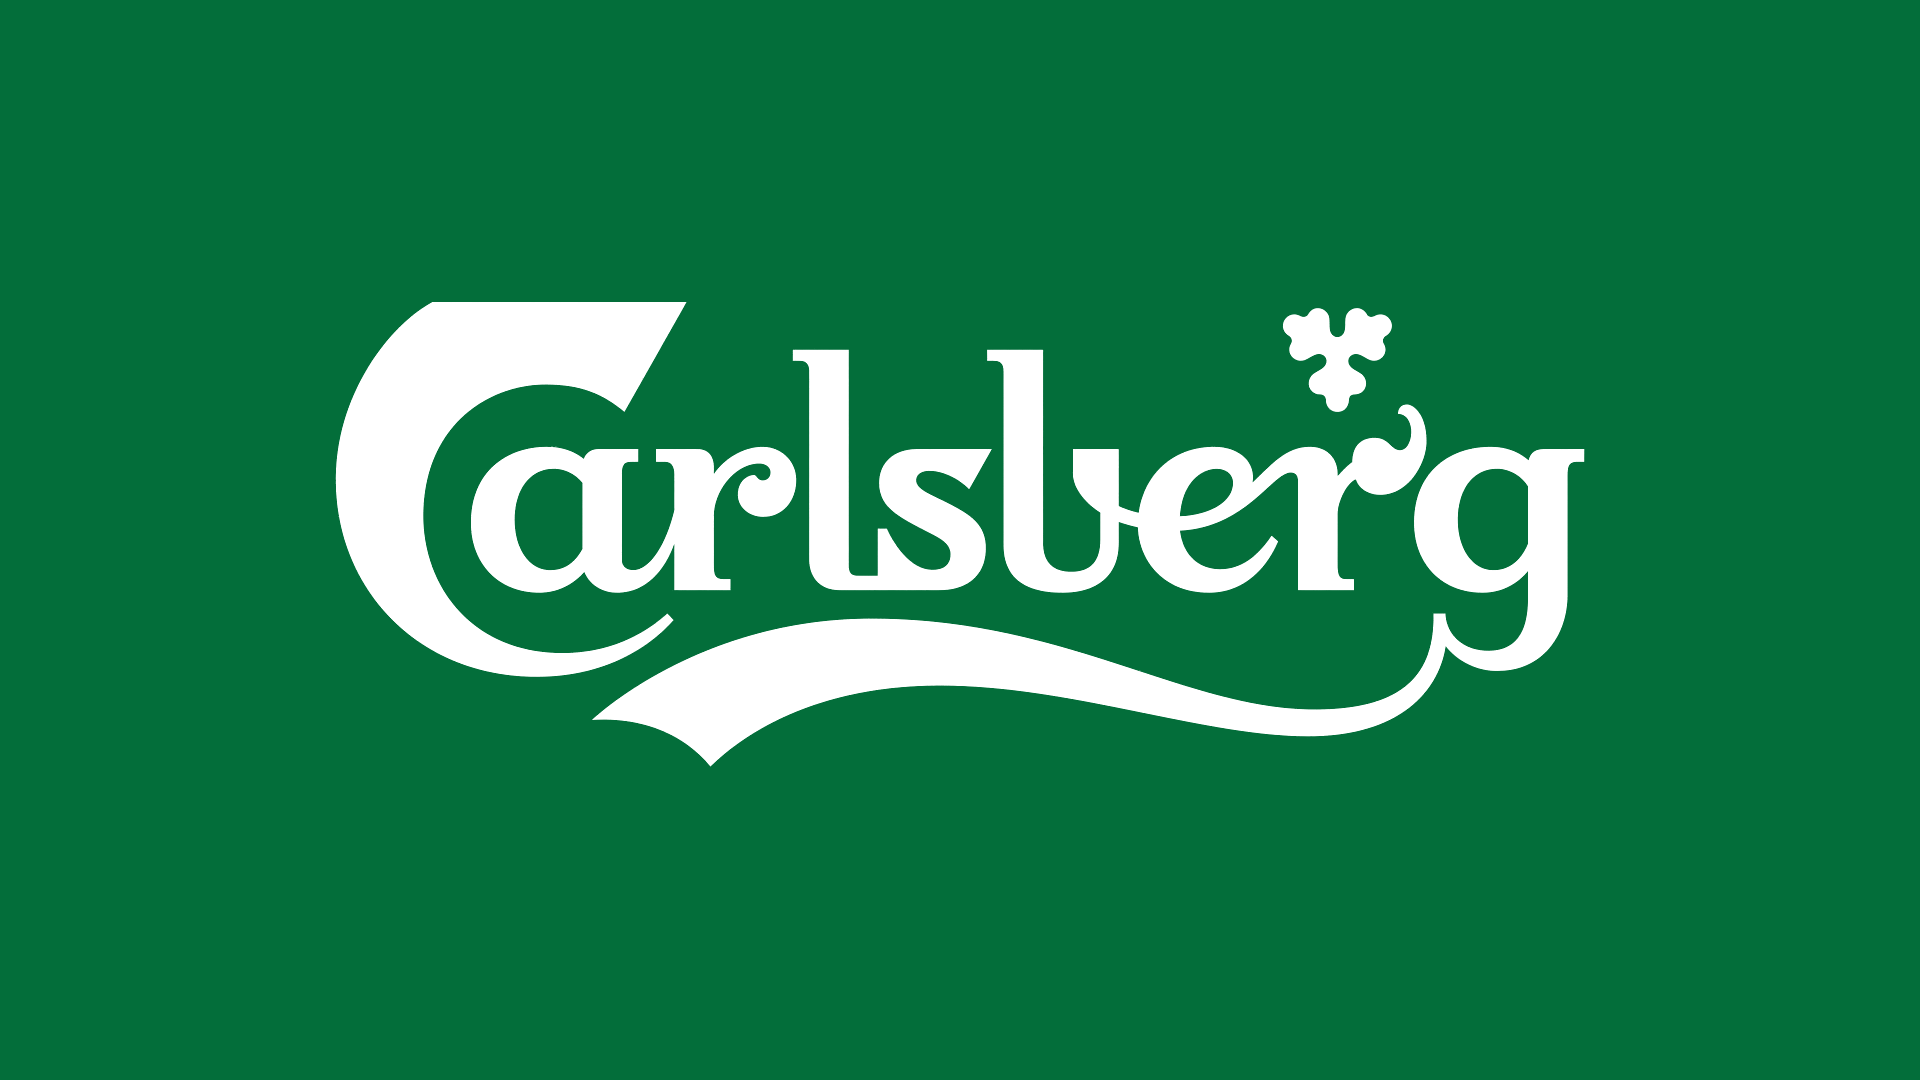 Brand New: New Logo and Packaging for Carlsberg by Taxi Studio